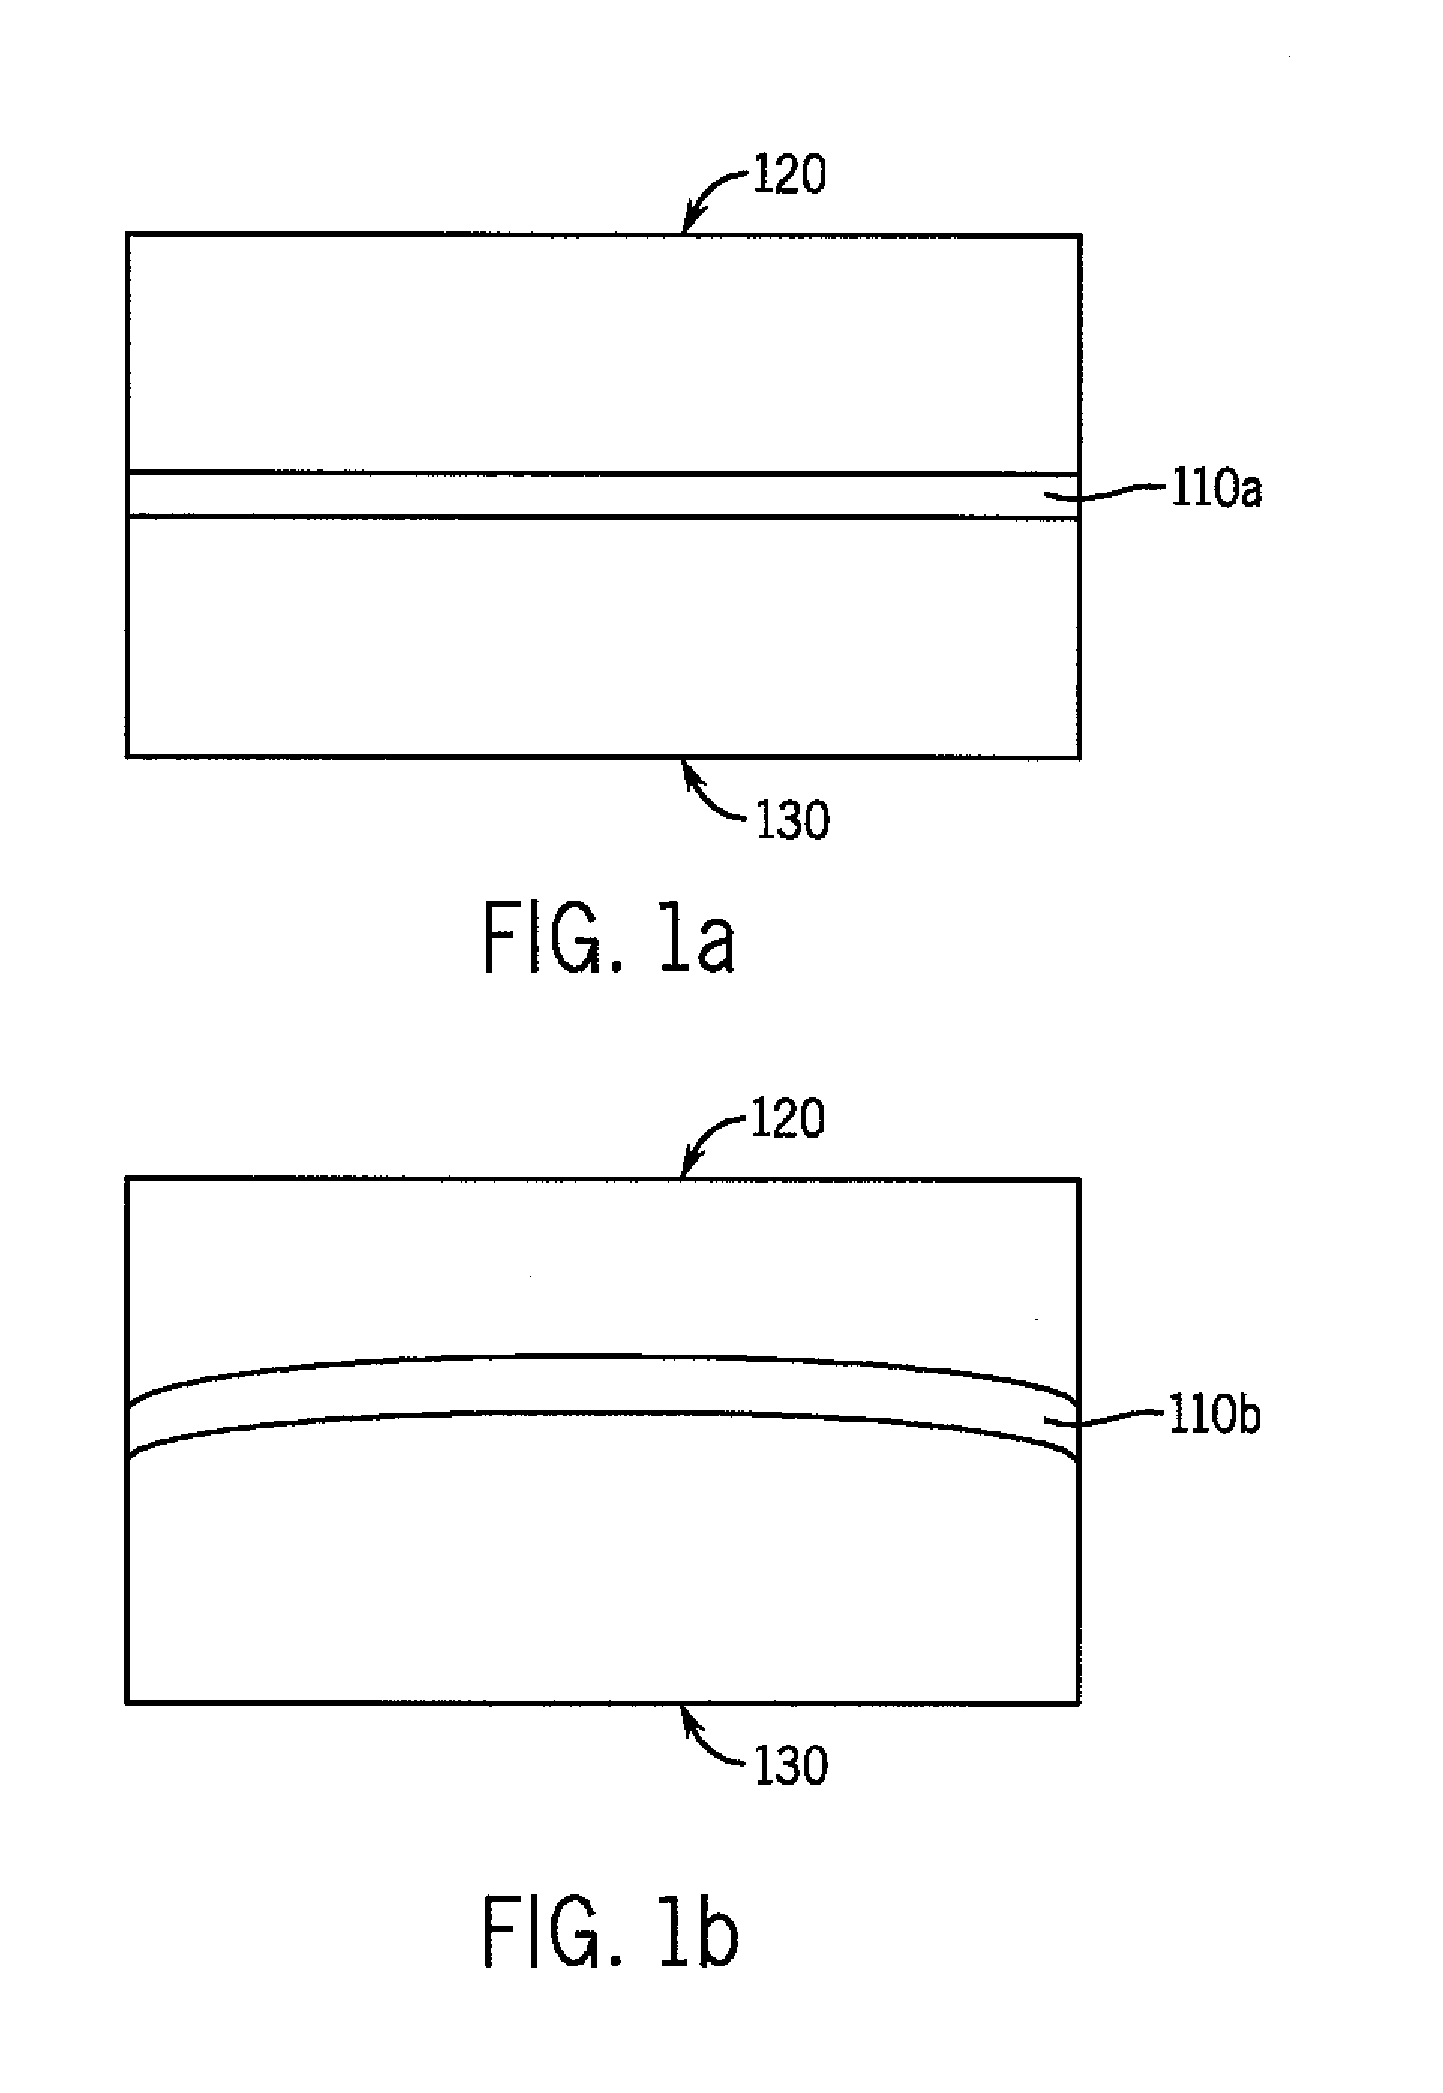 Fluidic adaptive lens systems and methods